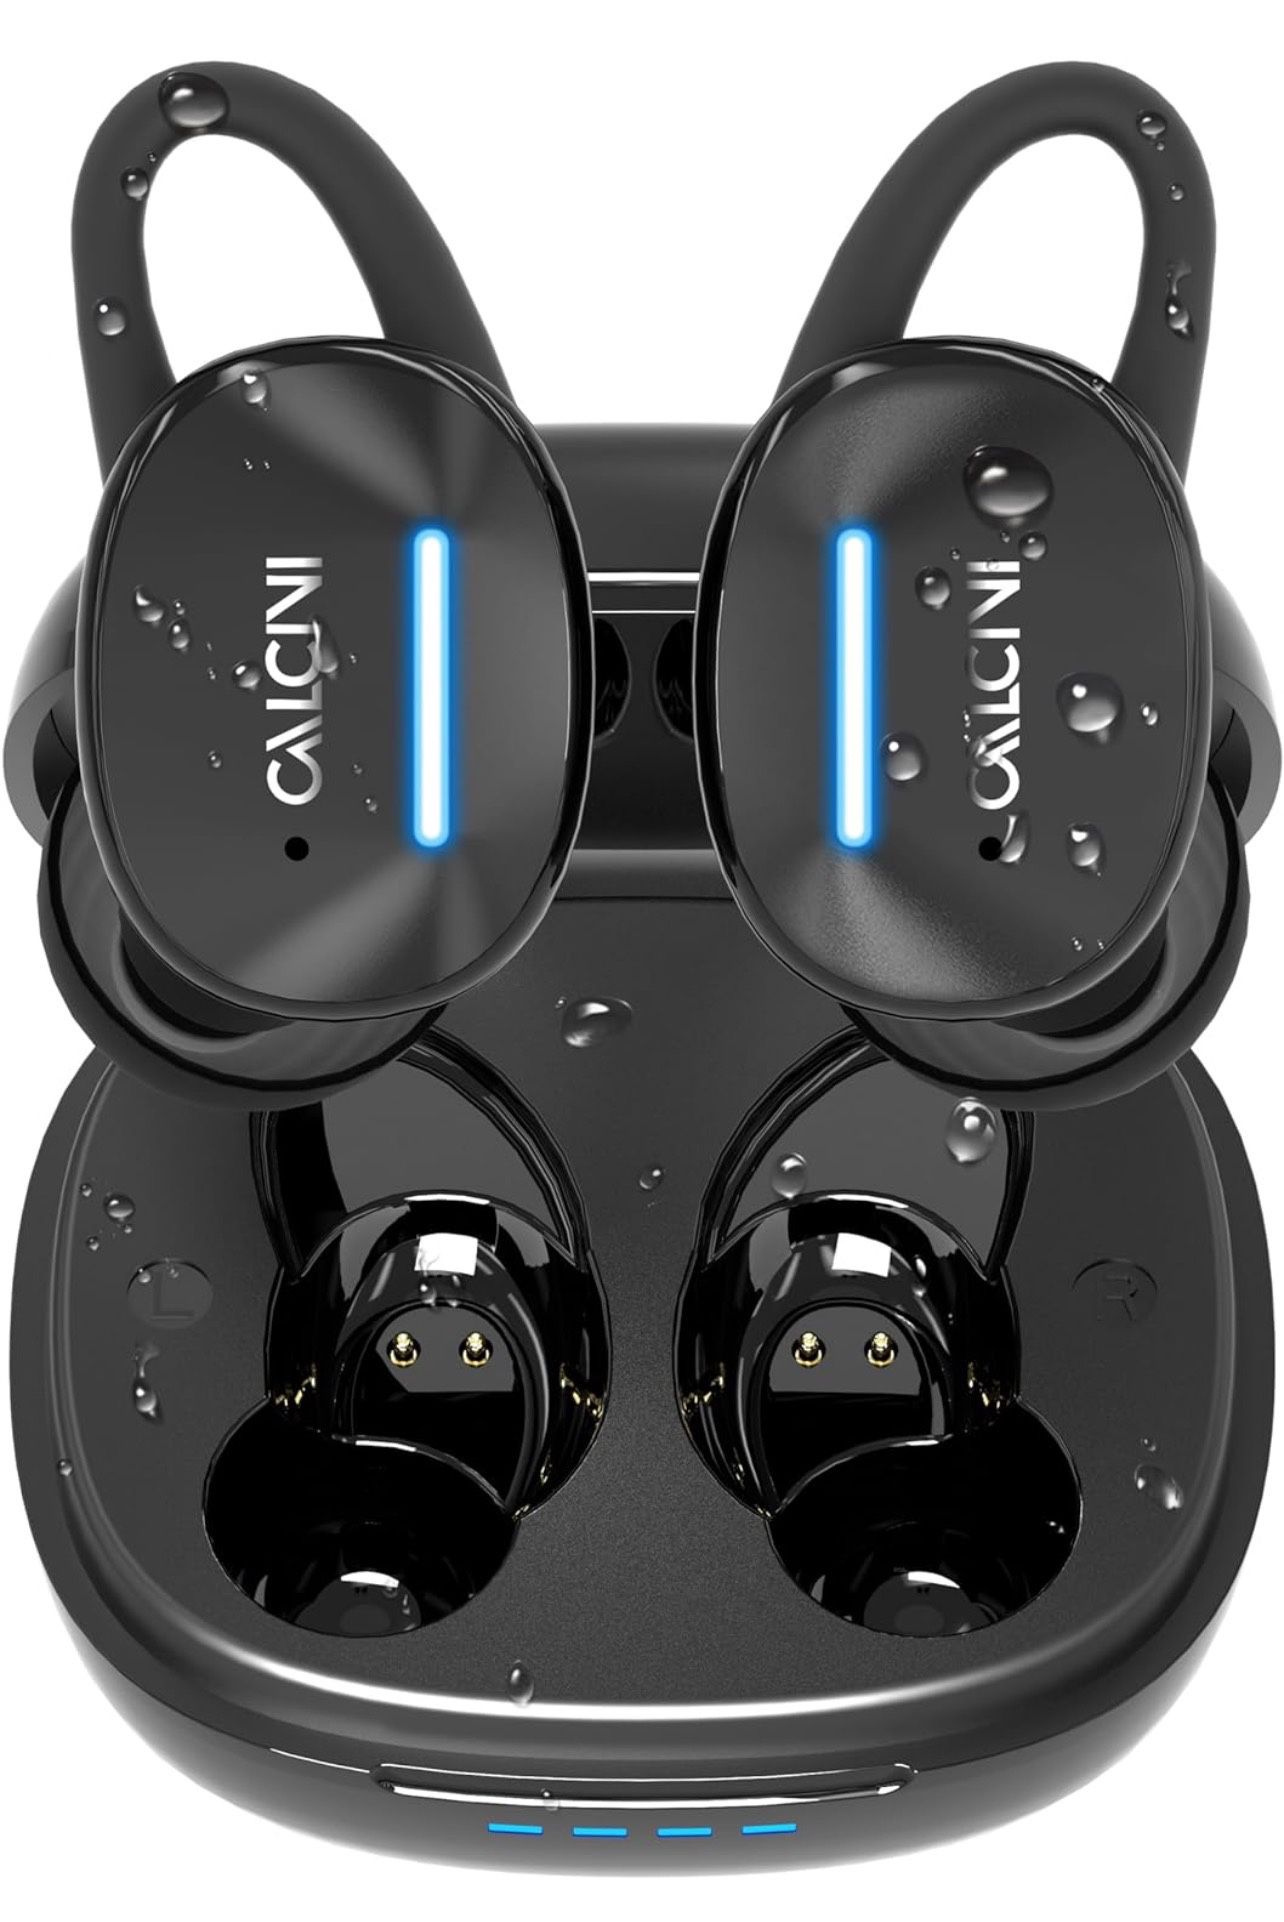 CALCINI Wireless Earbuds IPX8 Waterproof Touch Control, Bluetooth 5.3 in Ear Headphones with Charging Case, TWS Headset for Phone,Samsung,Android, Spo